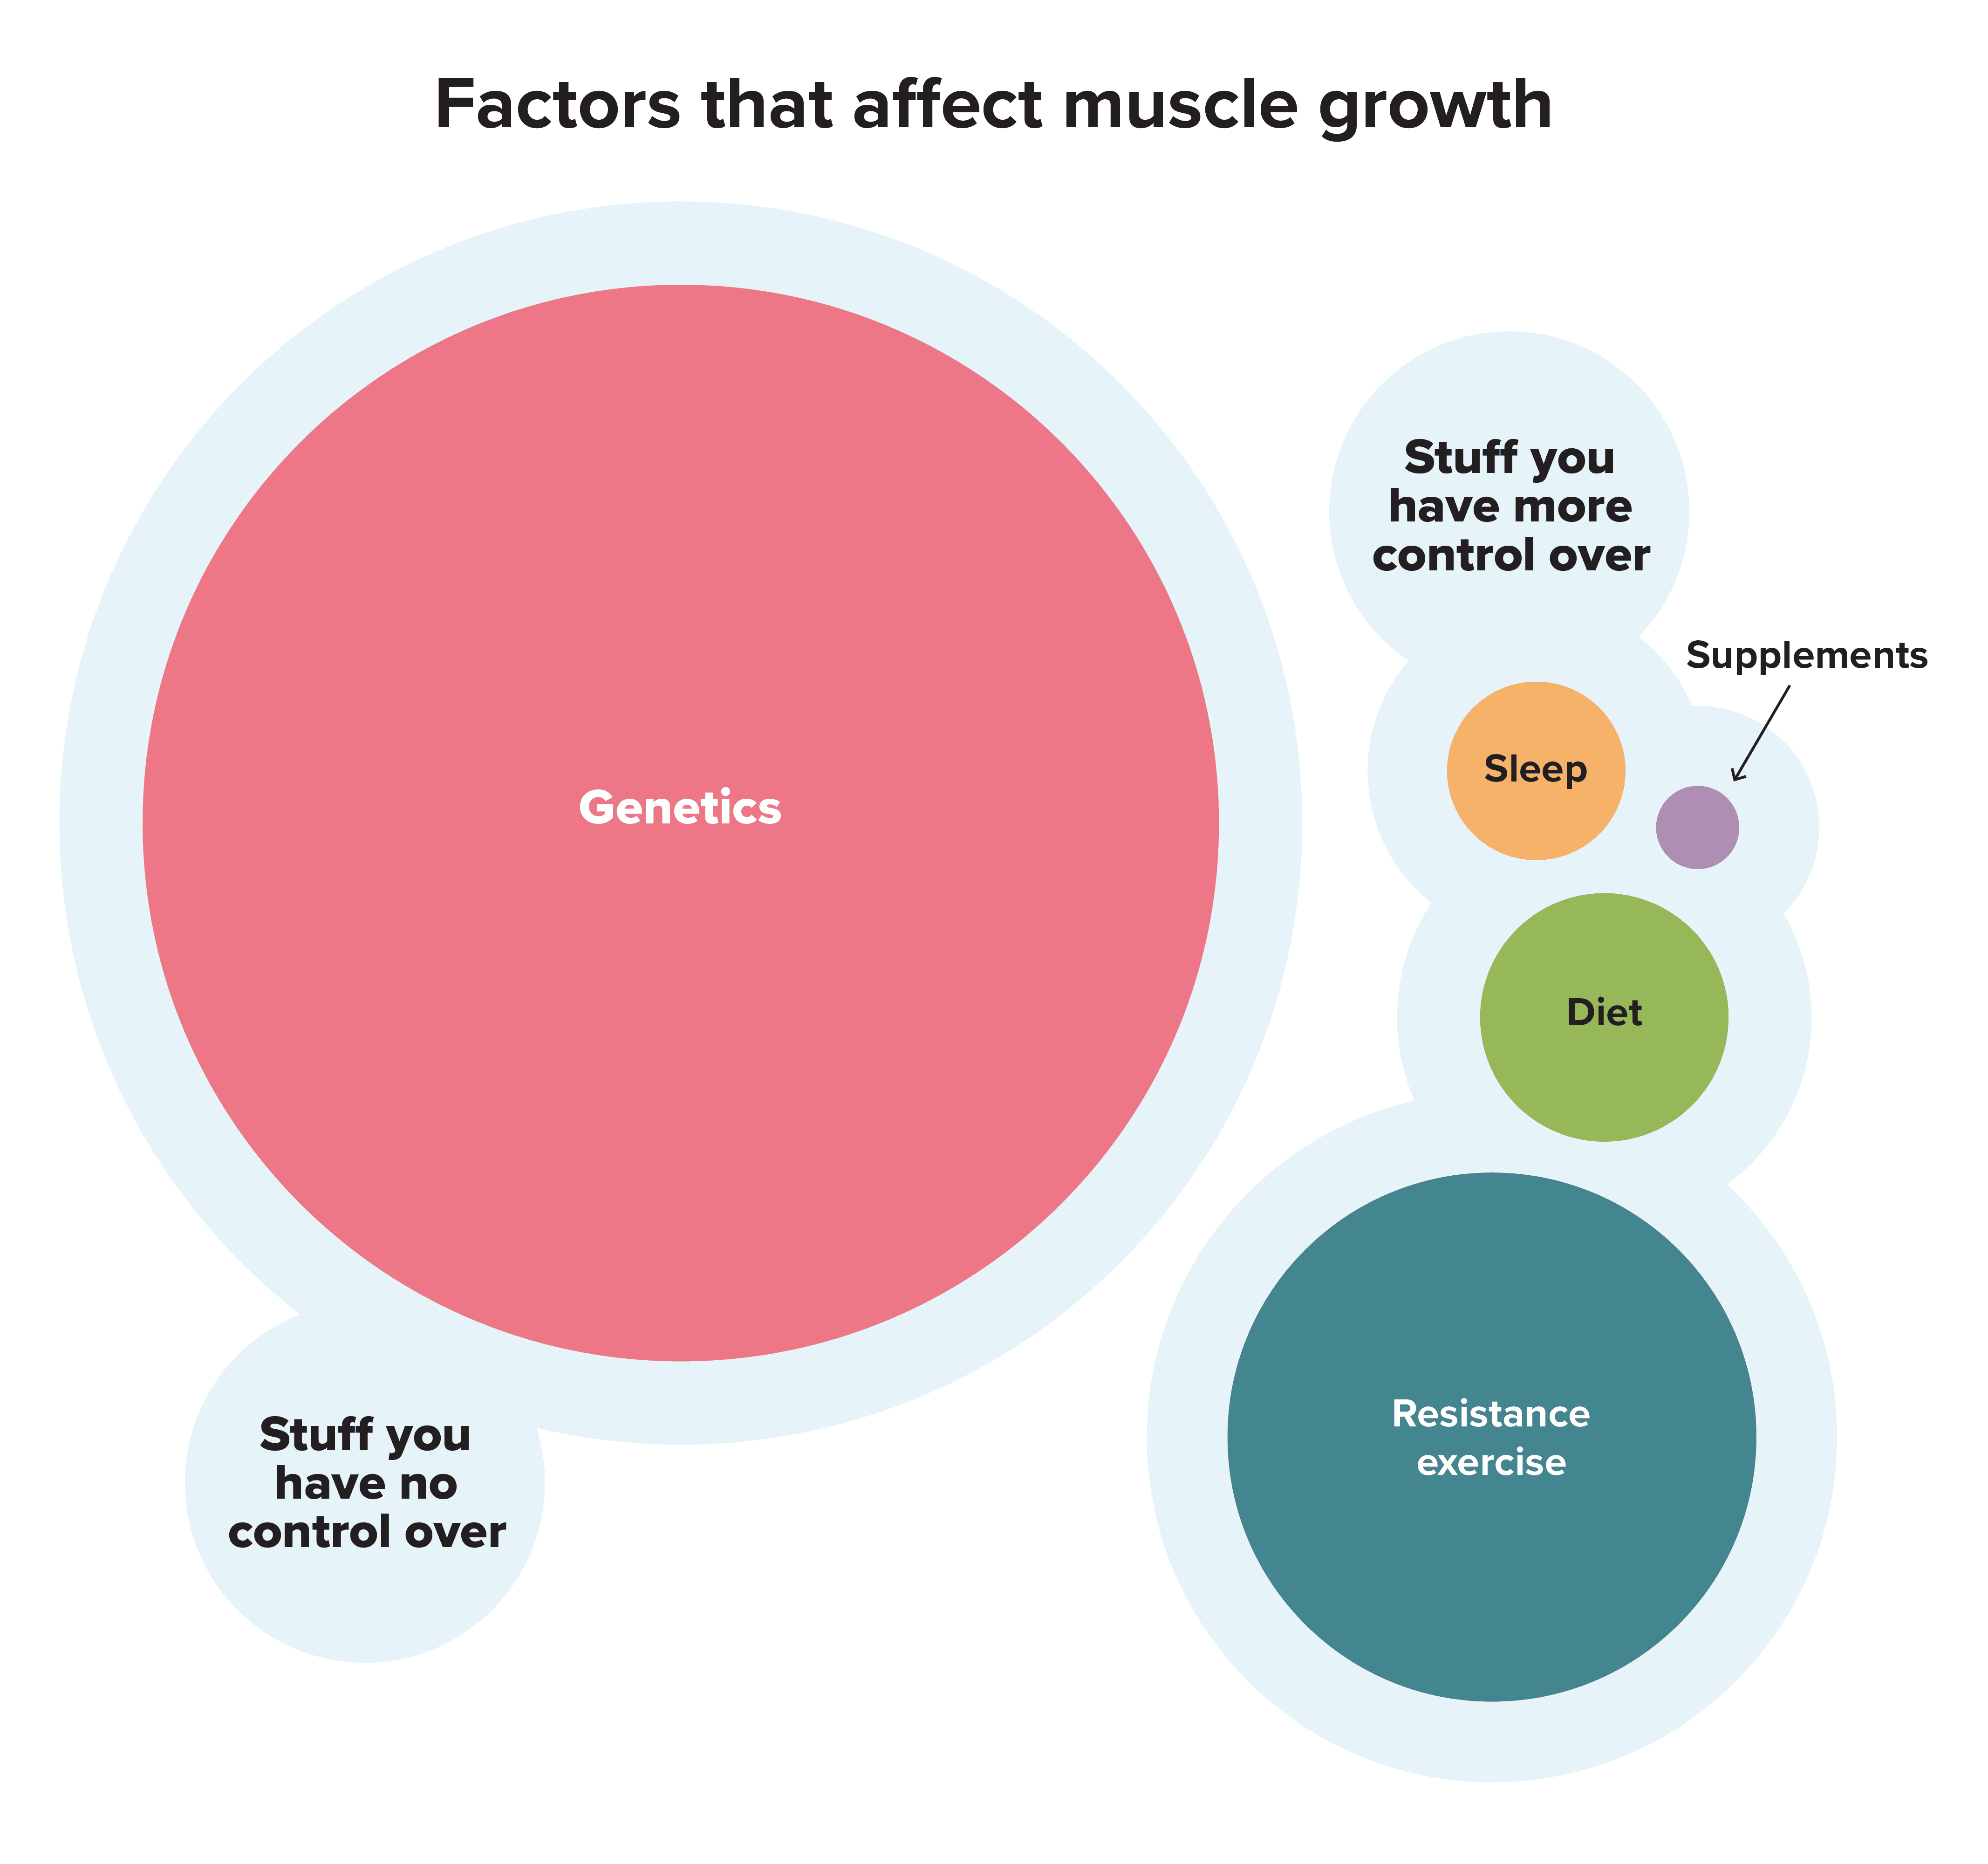 Image shows how different factors affect muscle growth. Some factors, like genetics, we have no control over. Other factors, like resistance training, diet, sleep, and supplements, we have more control over.